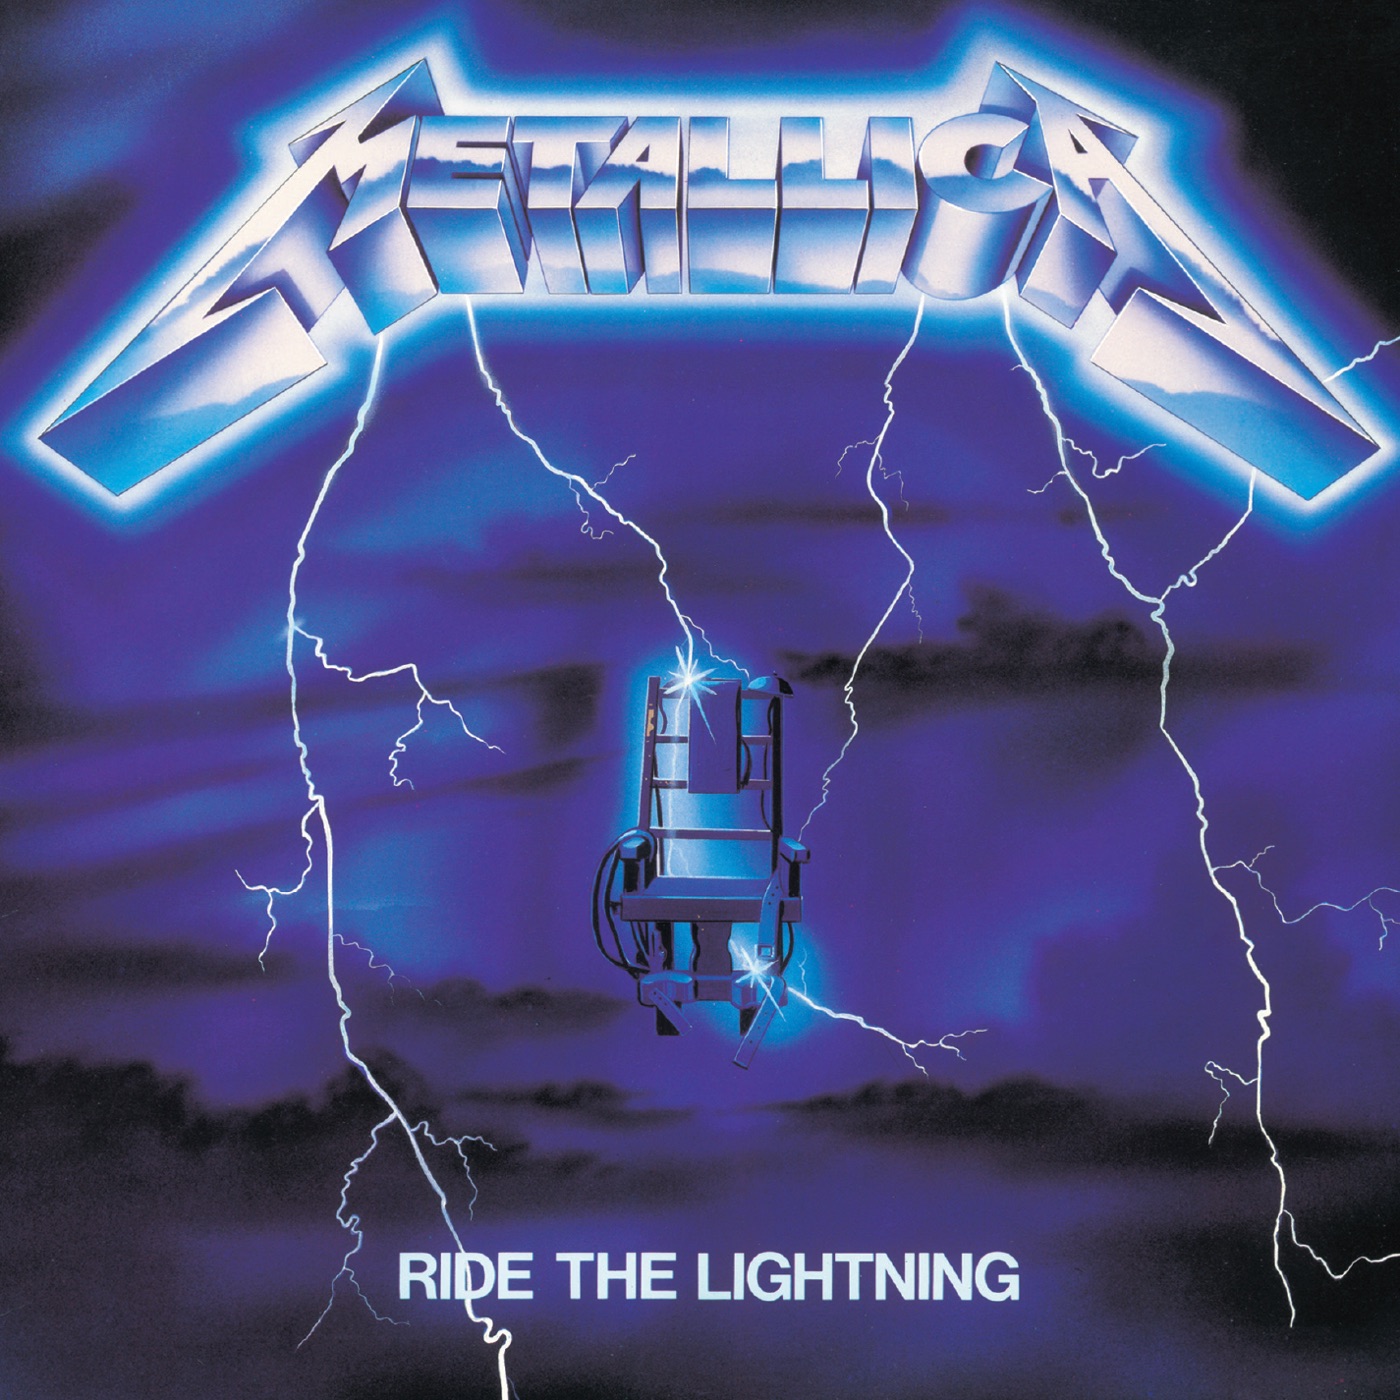 Ride the Lightning (Remastered) by Metallica